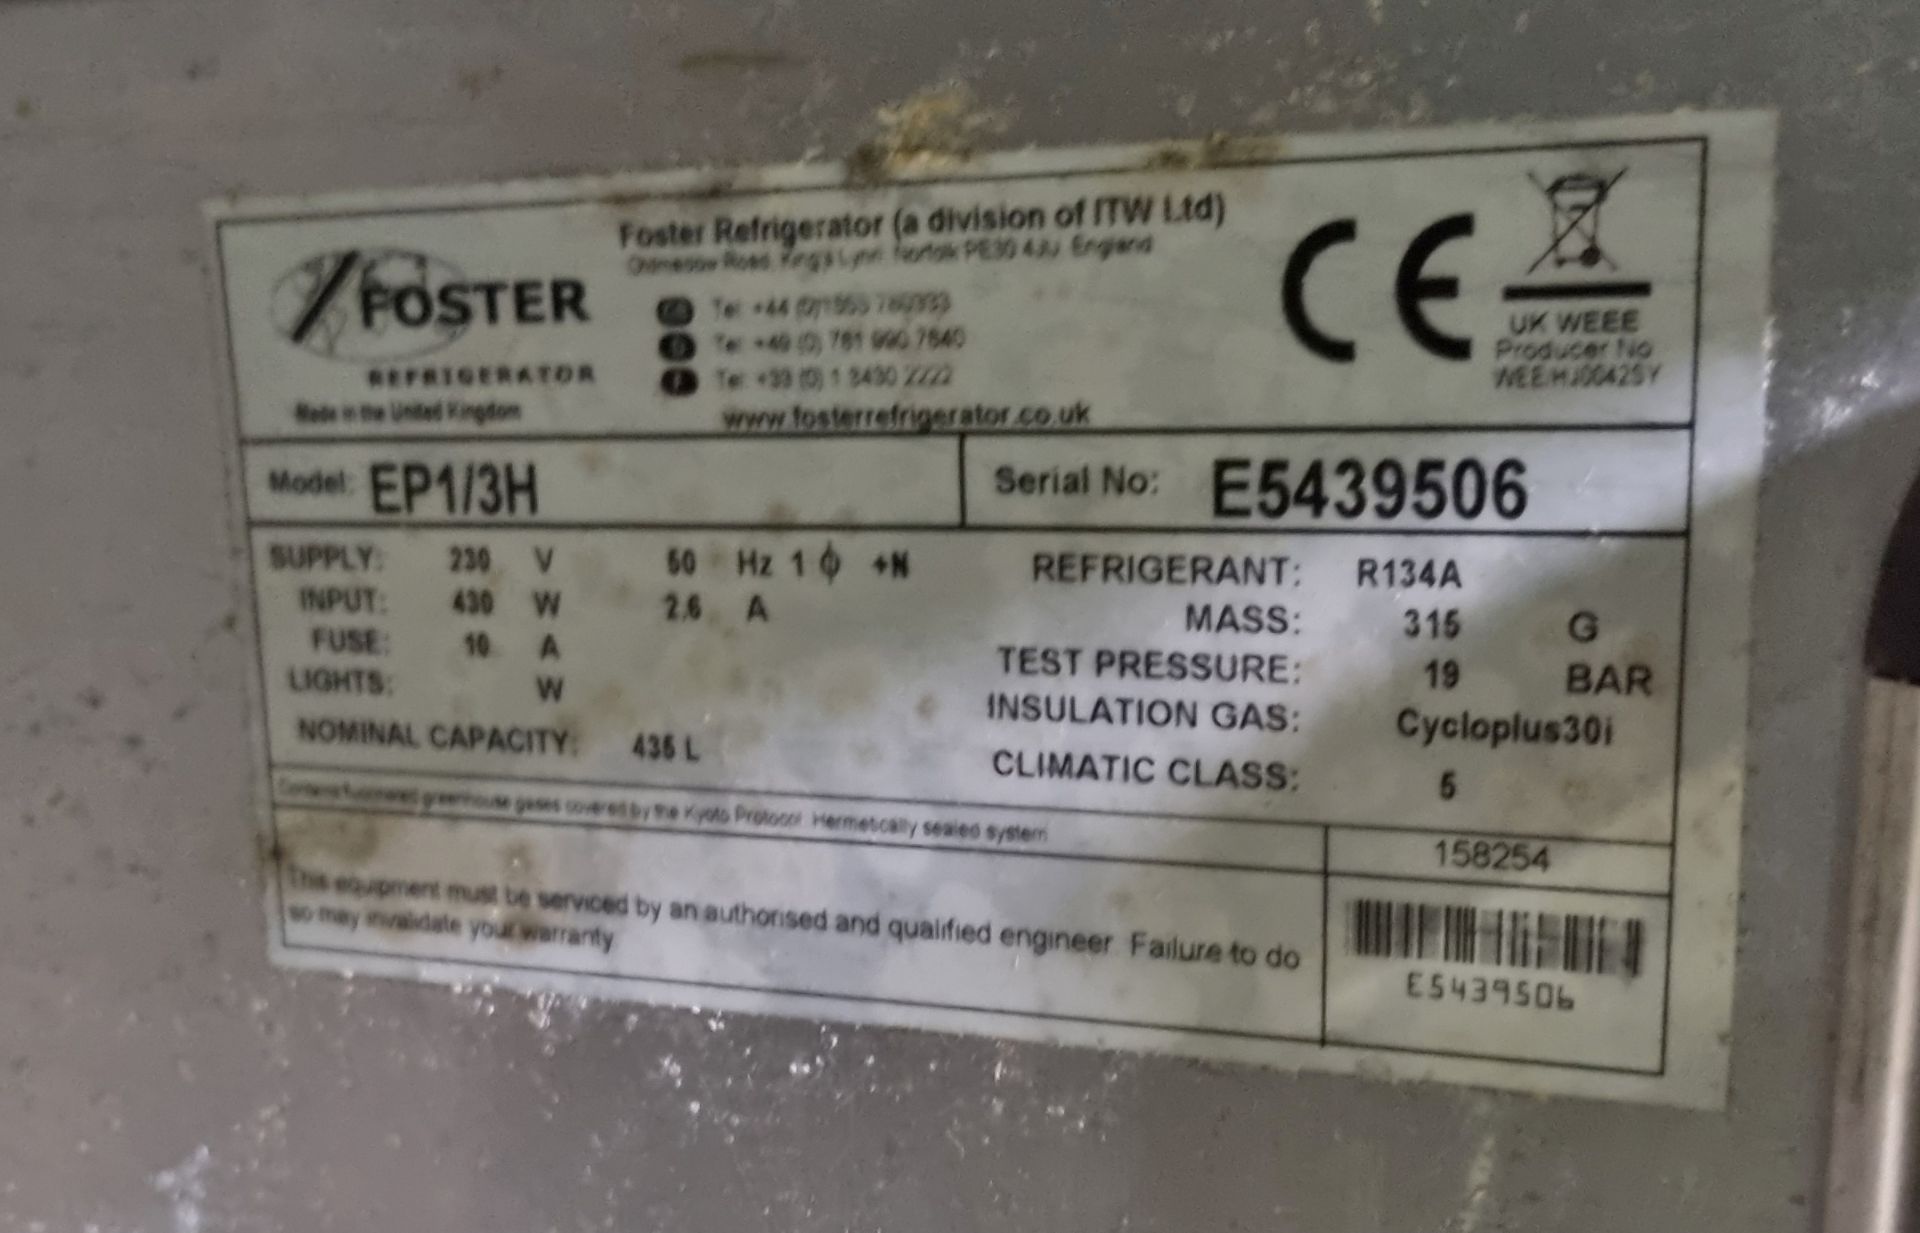 Foster Eco Pro G2 EP1/3H 2 door / 3 drawer counter fridge - W 1860 x D 700 x H 860 mm - Image 5 of 6